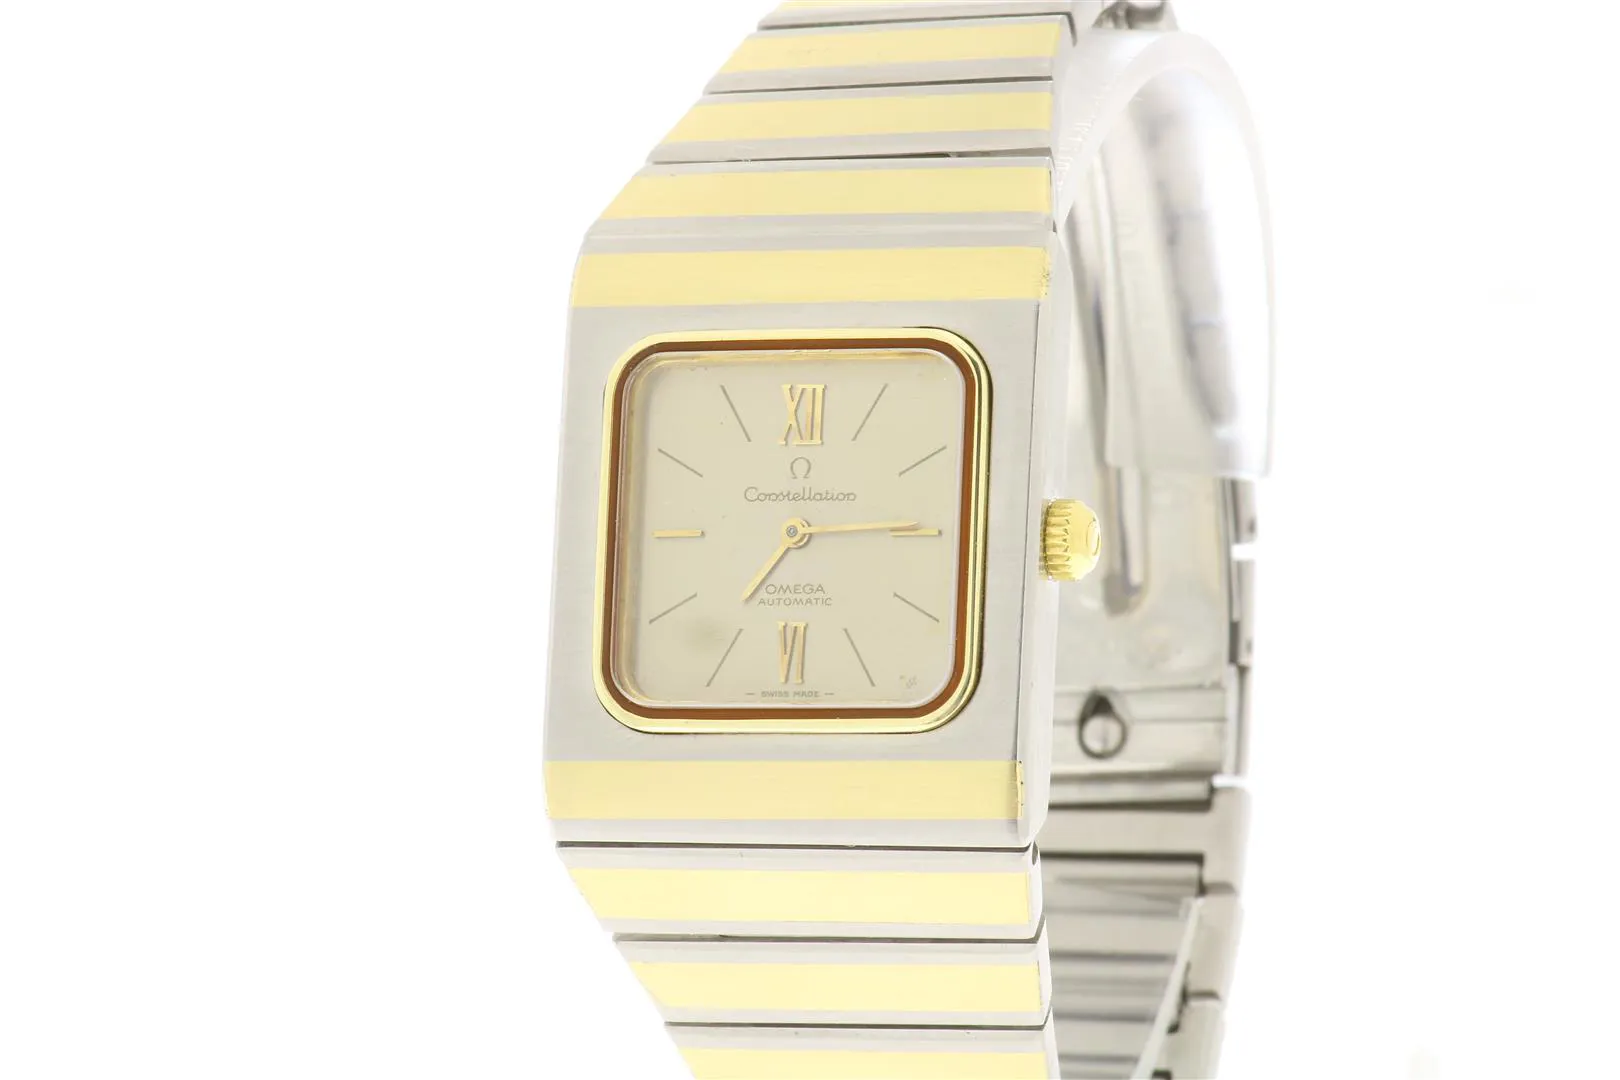 Omega Constellation 18mm Stainless steel and gold-plated